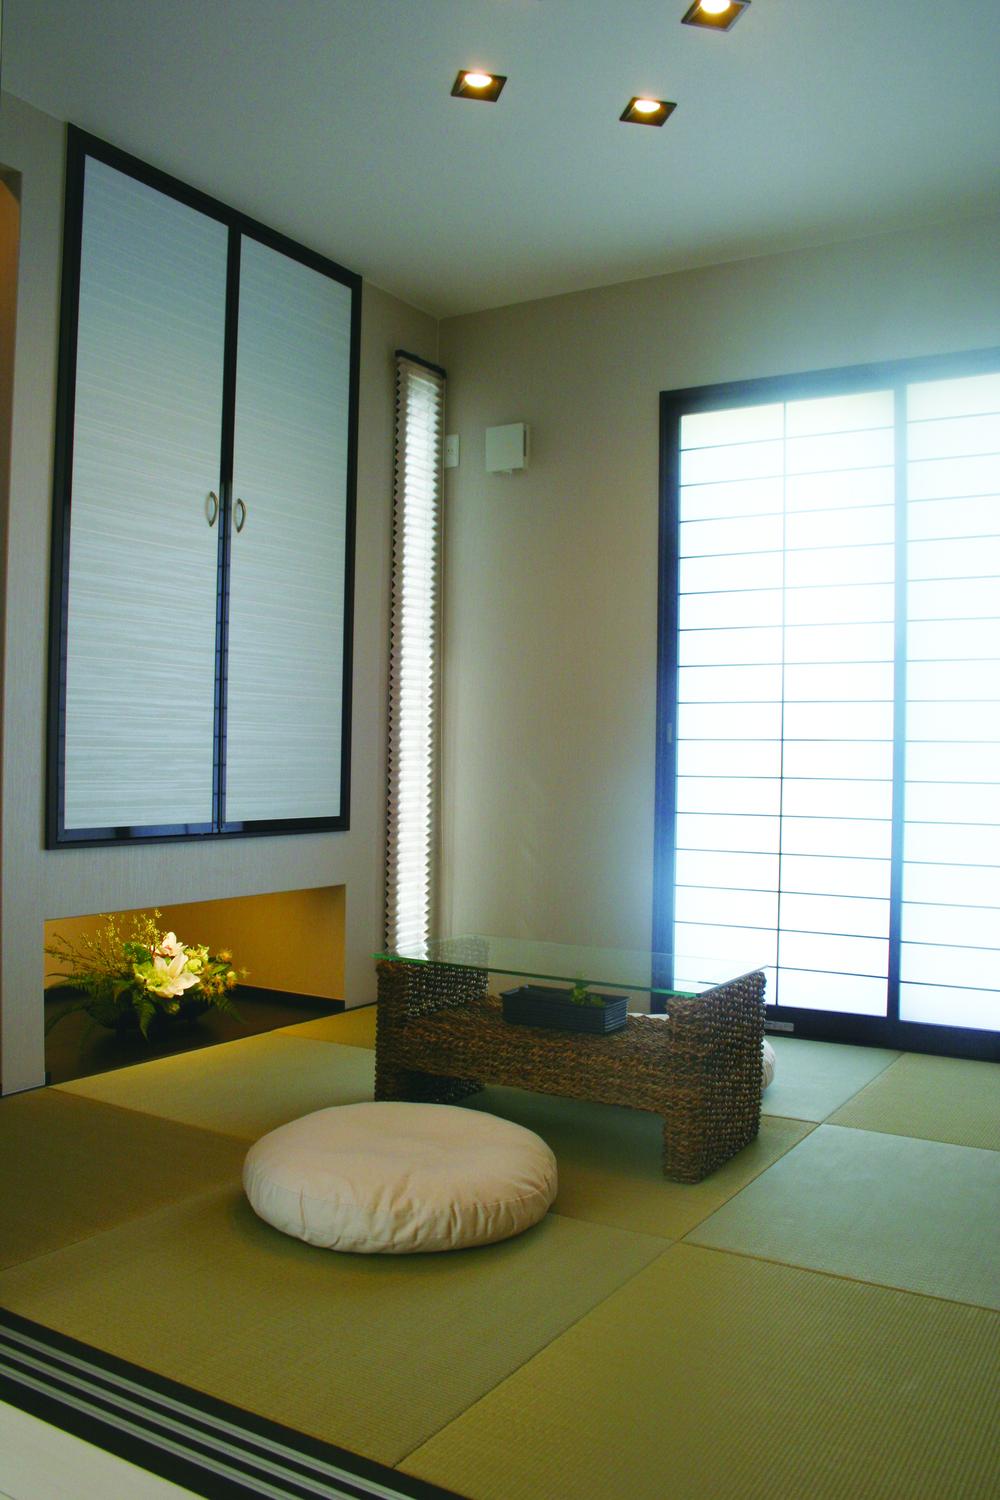 Non-living room. japanese room moist and calm atmosphere of the Japanese-style will produce a taste of the sum in the downlight lighting.